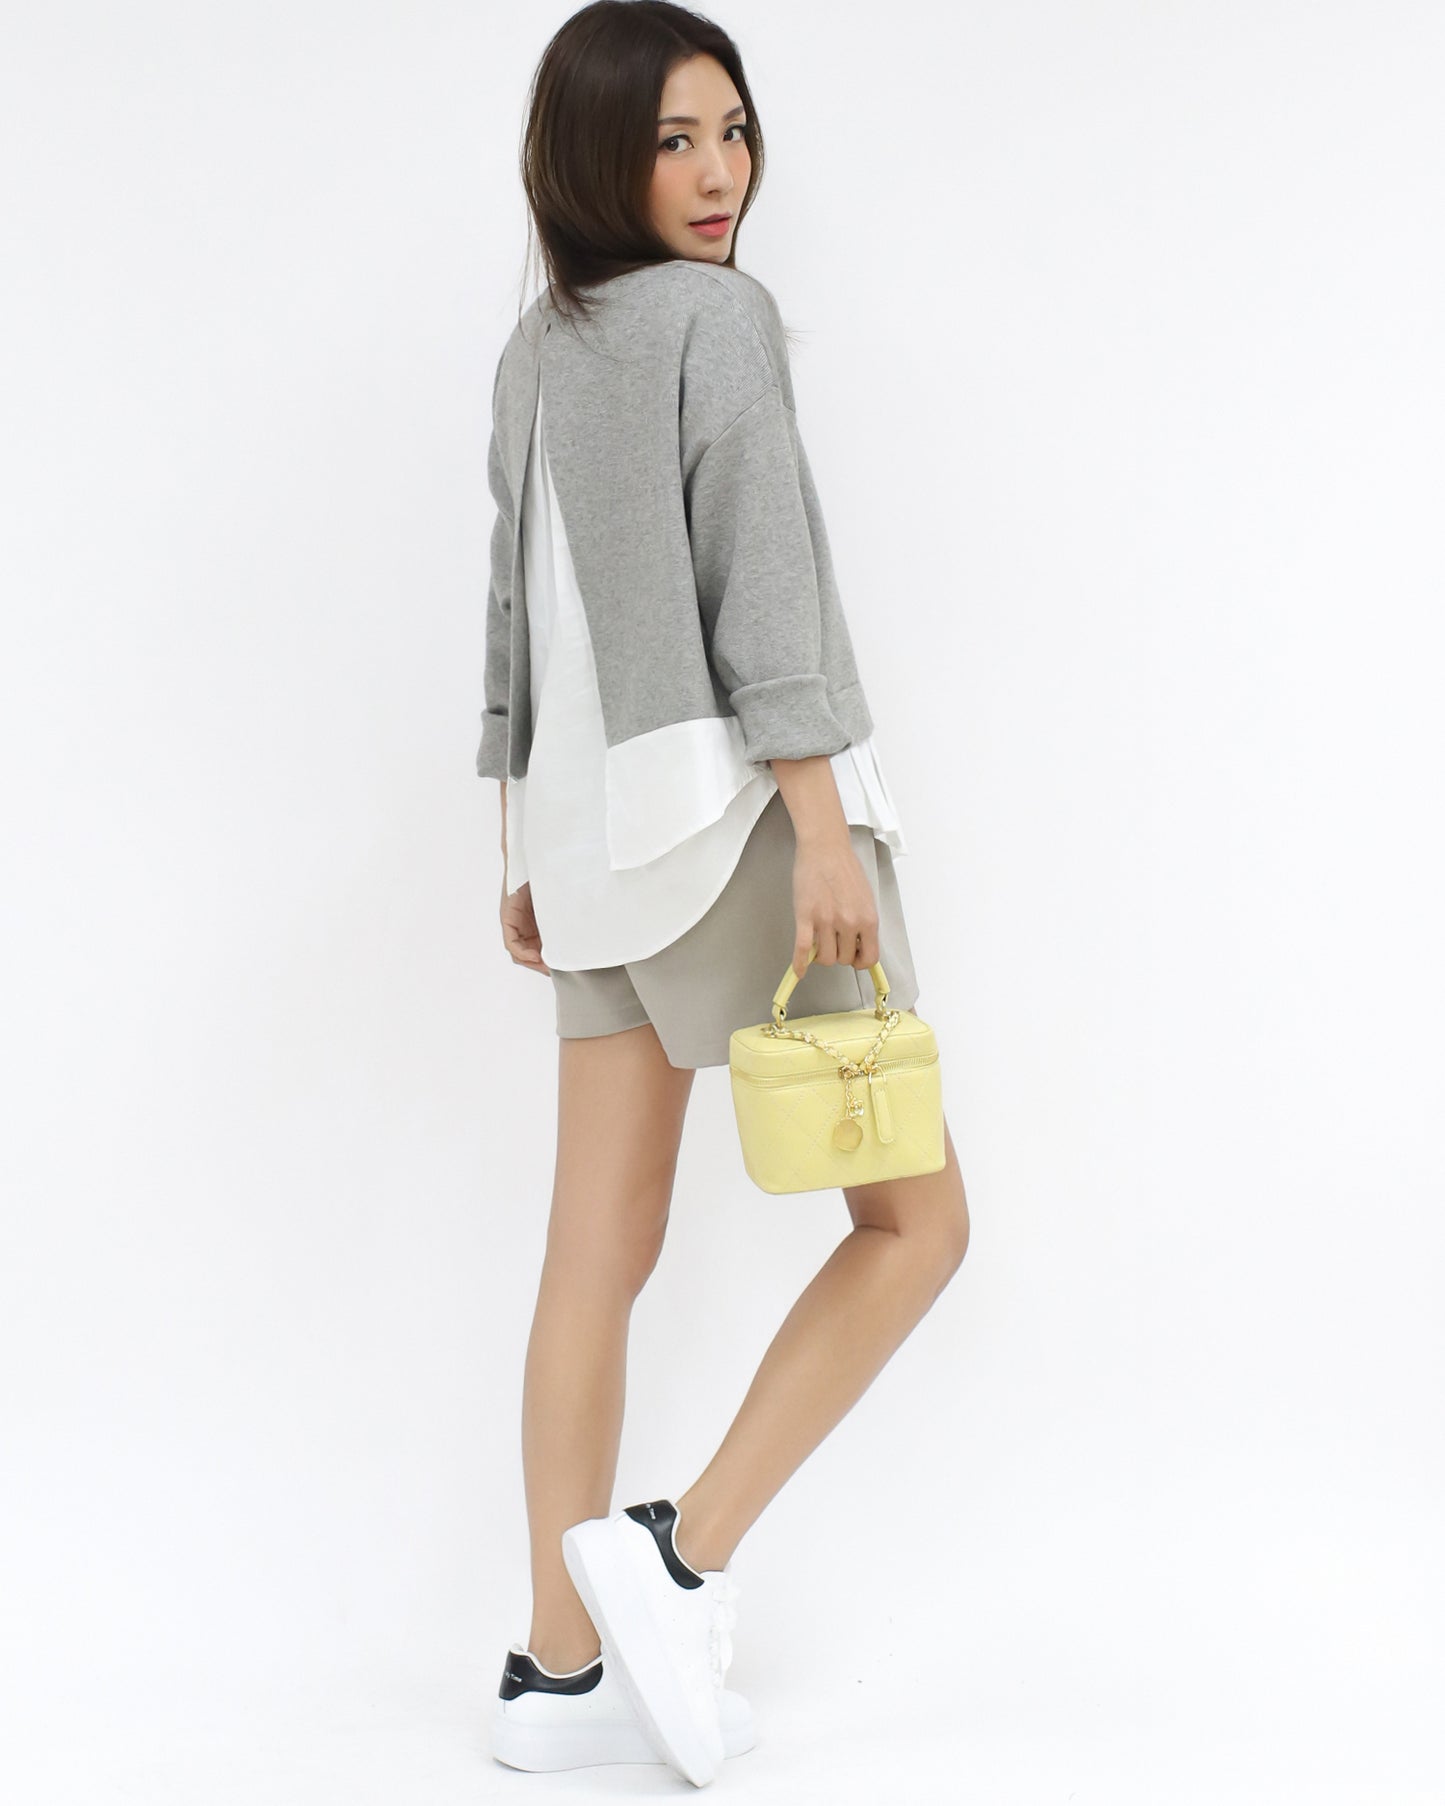 grey knitted w/ ivory pleats shirt layer top